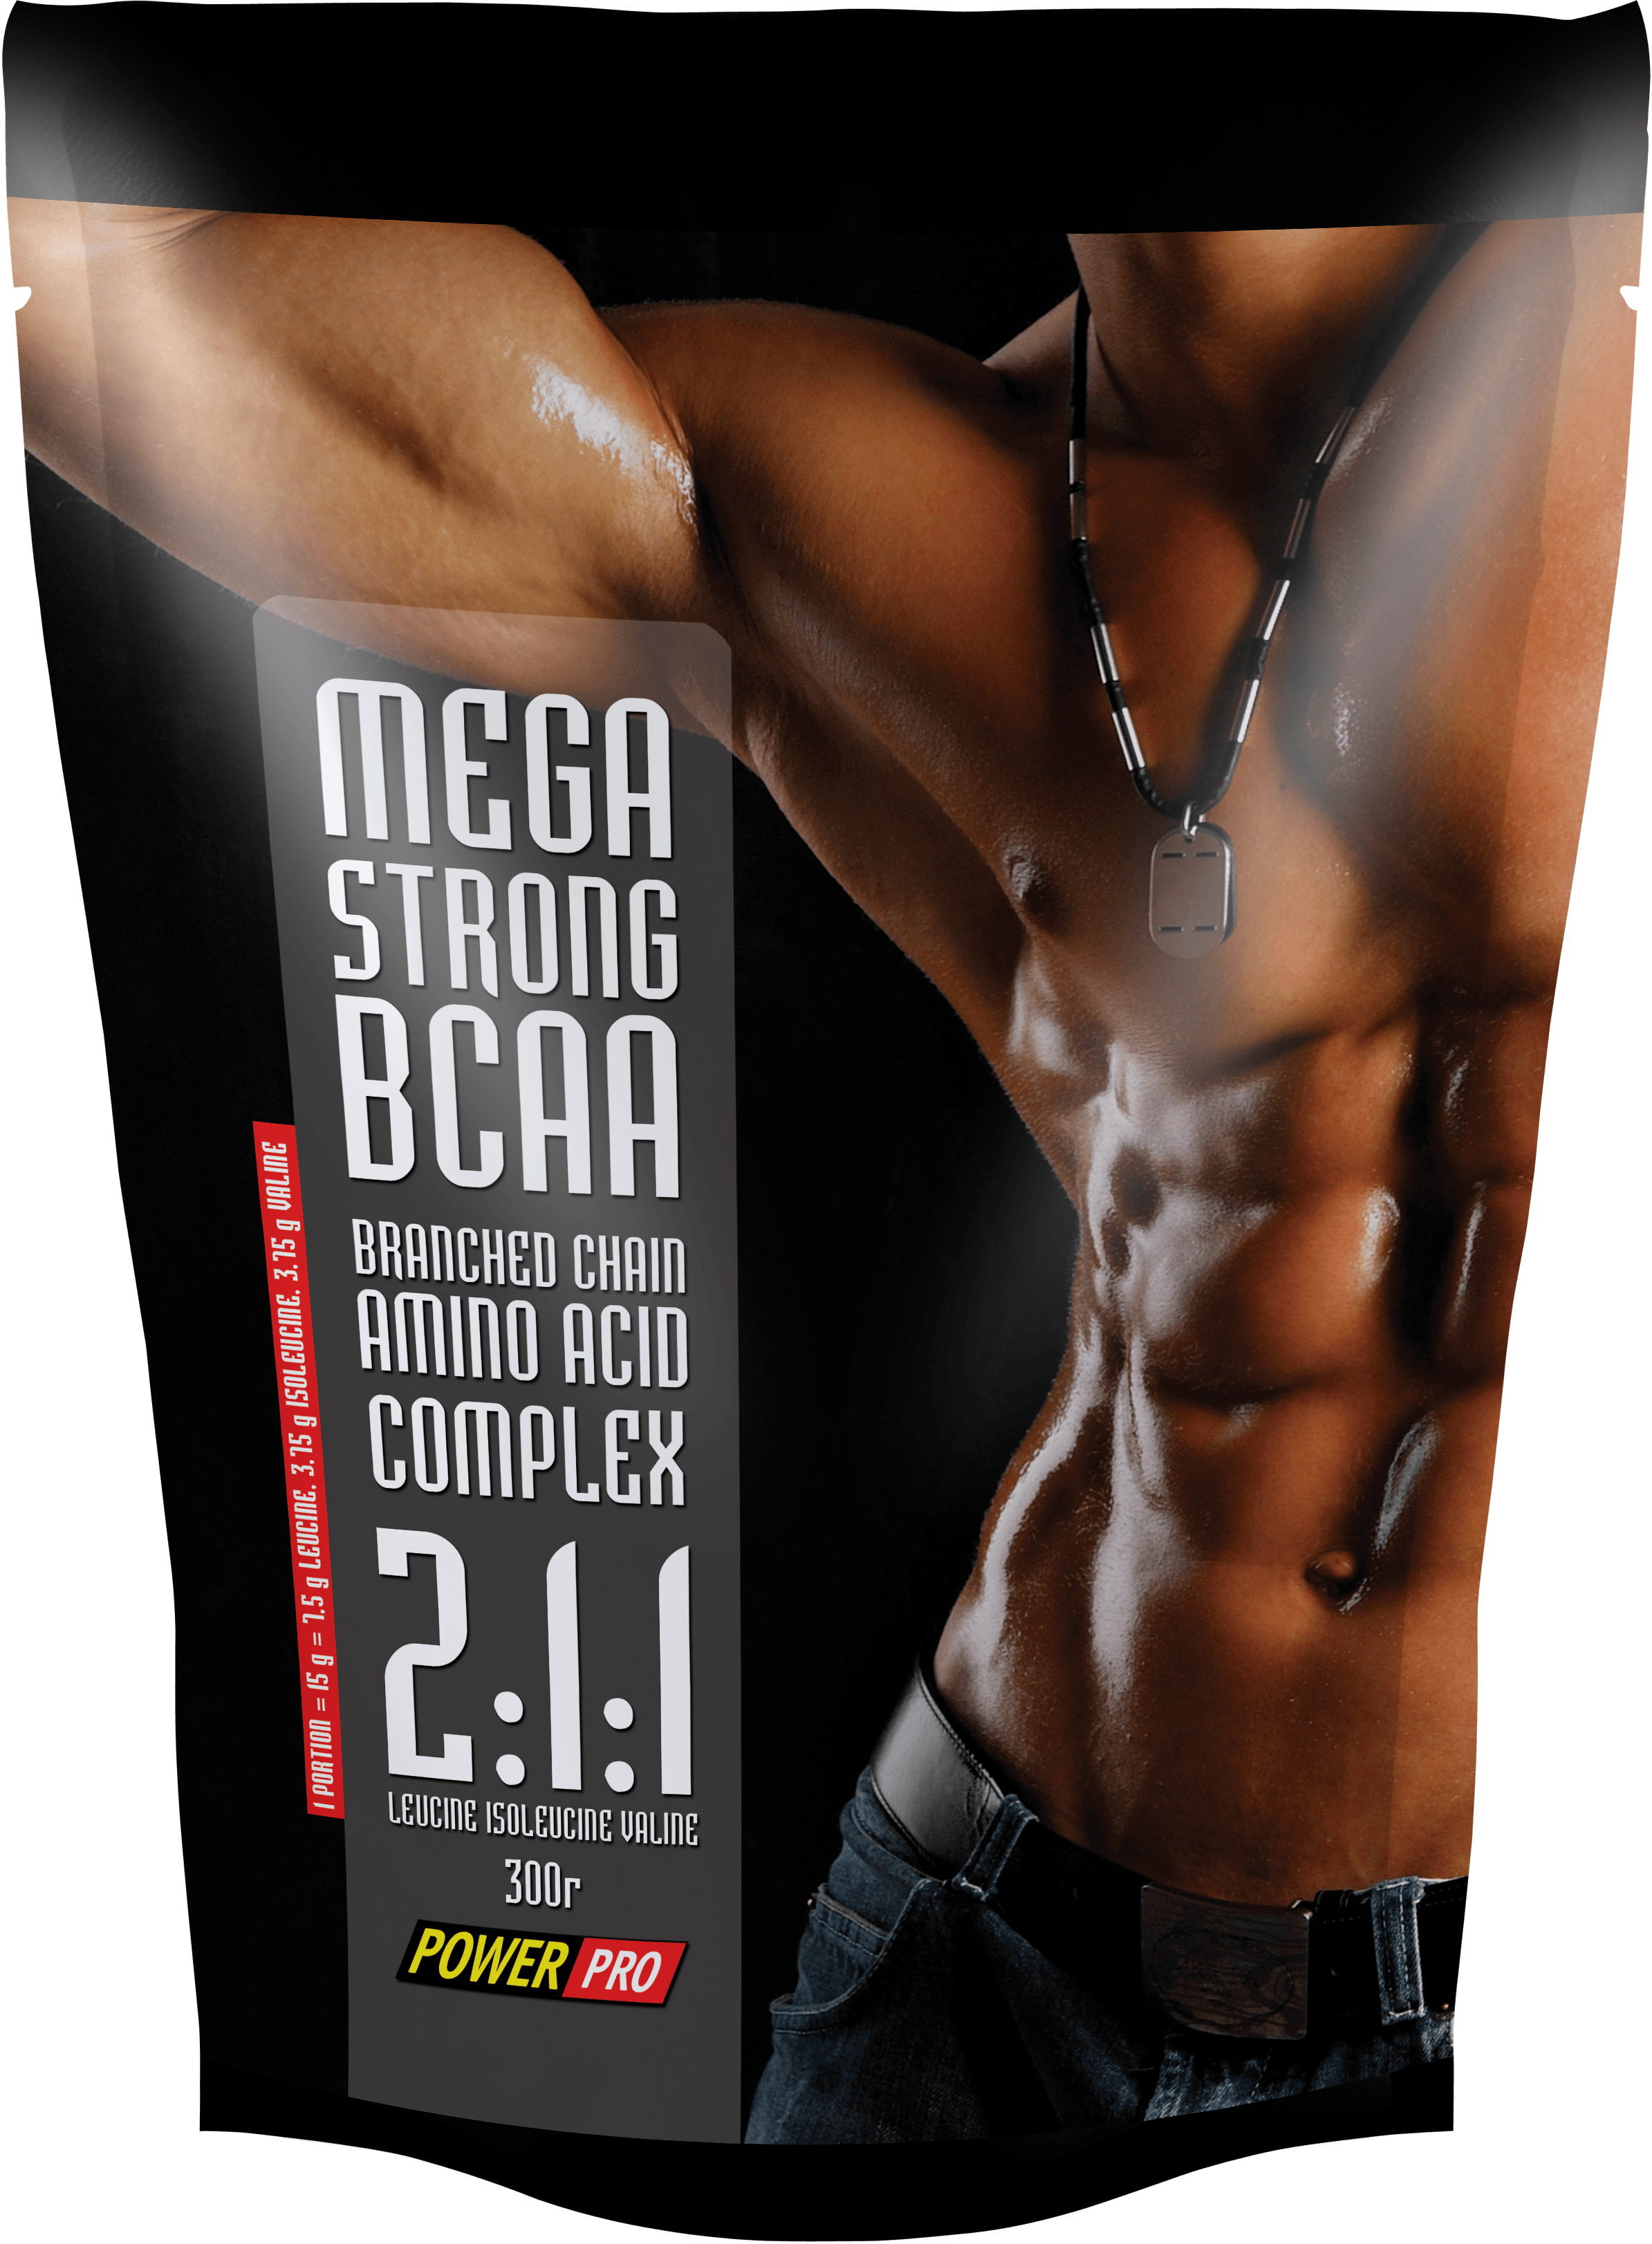 Mega Strong BCAA, 300 gr, Power Pro. BCAA. Weight Loss recovery Anti-catabolic properties Lean muscle mass 